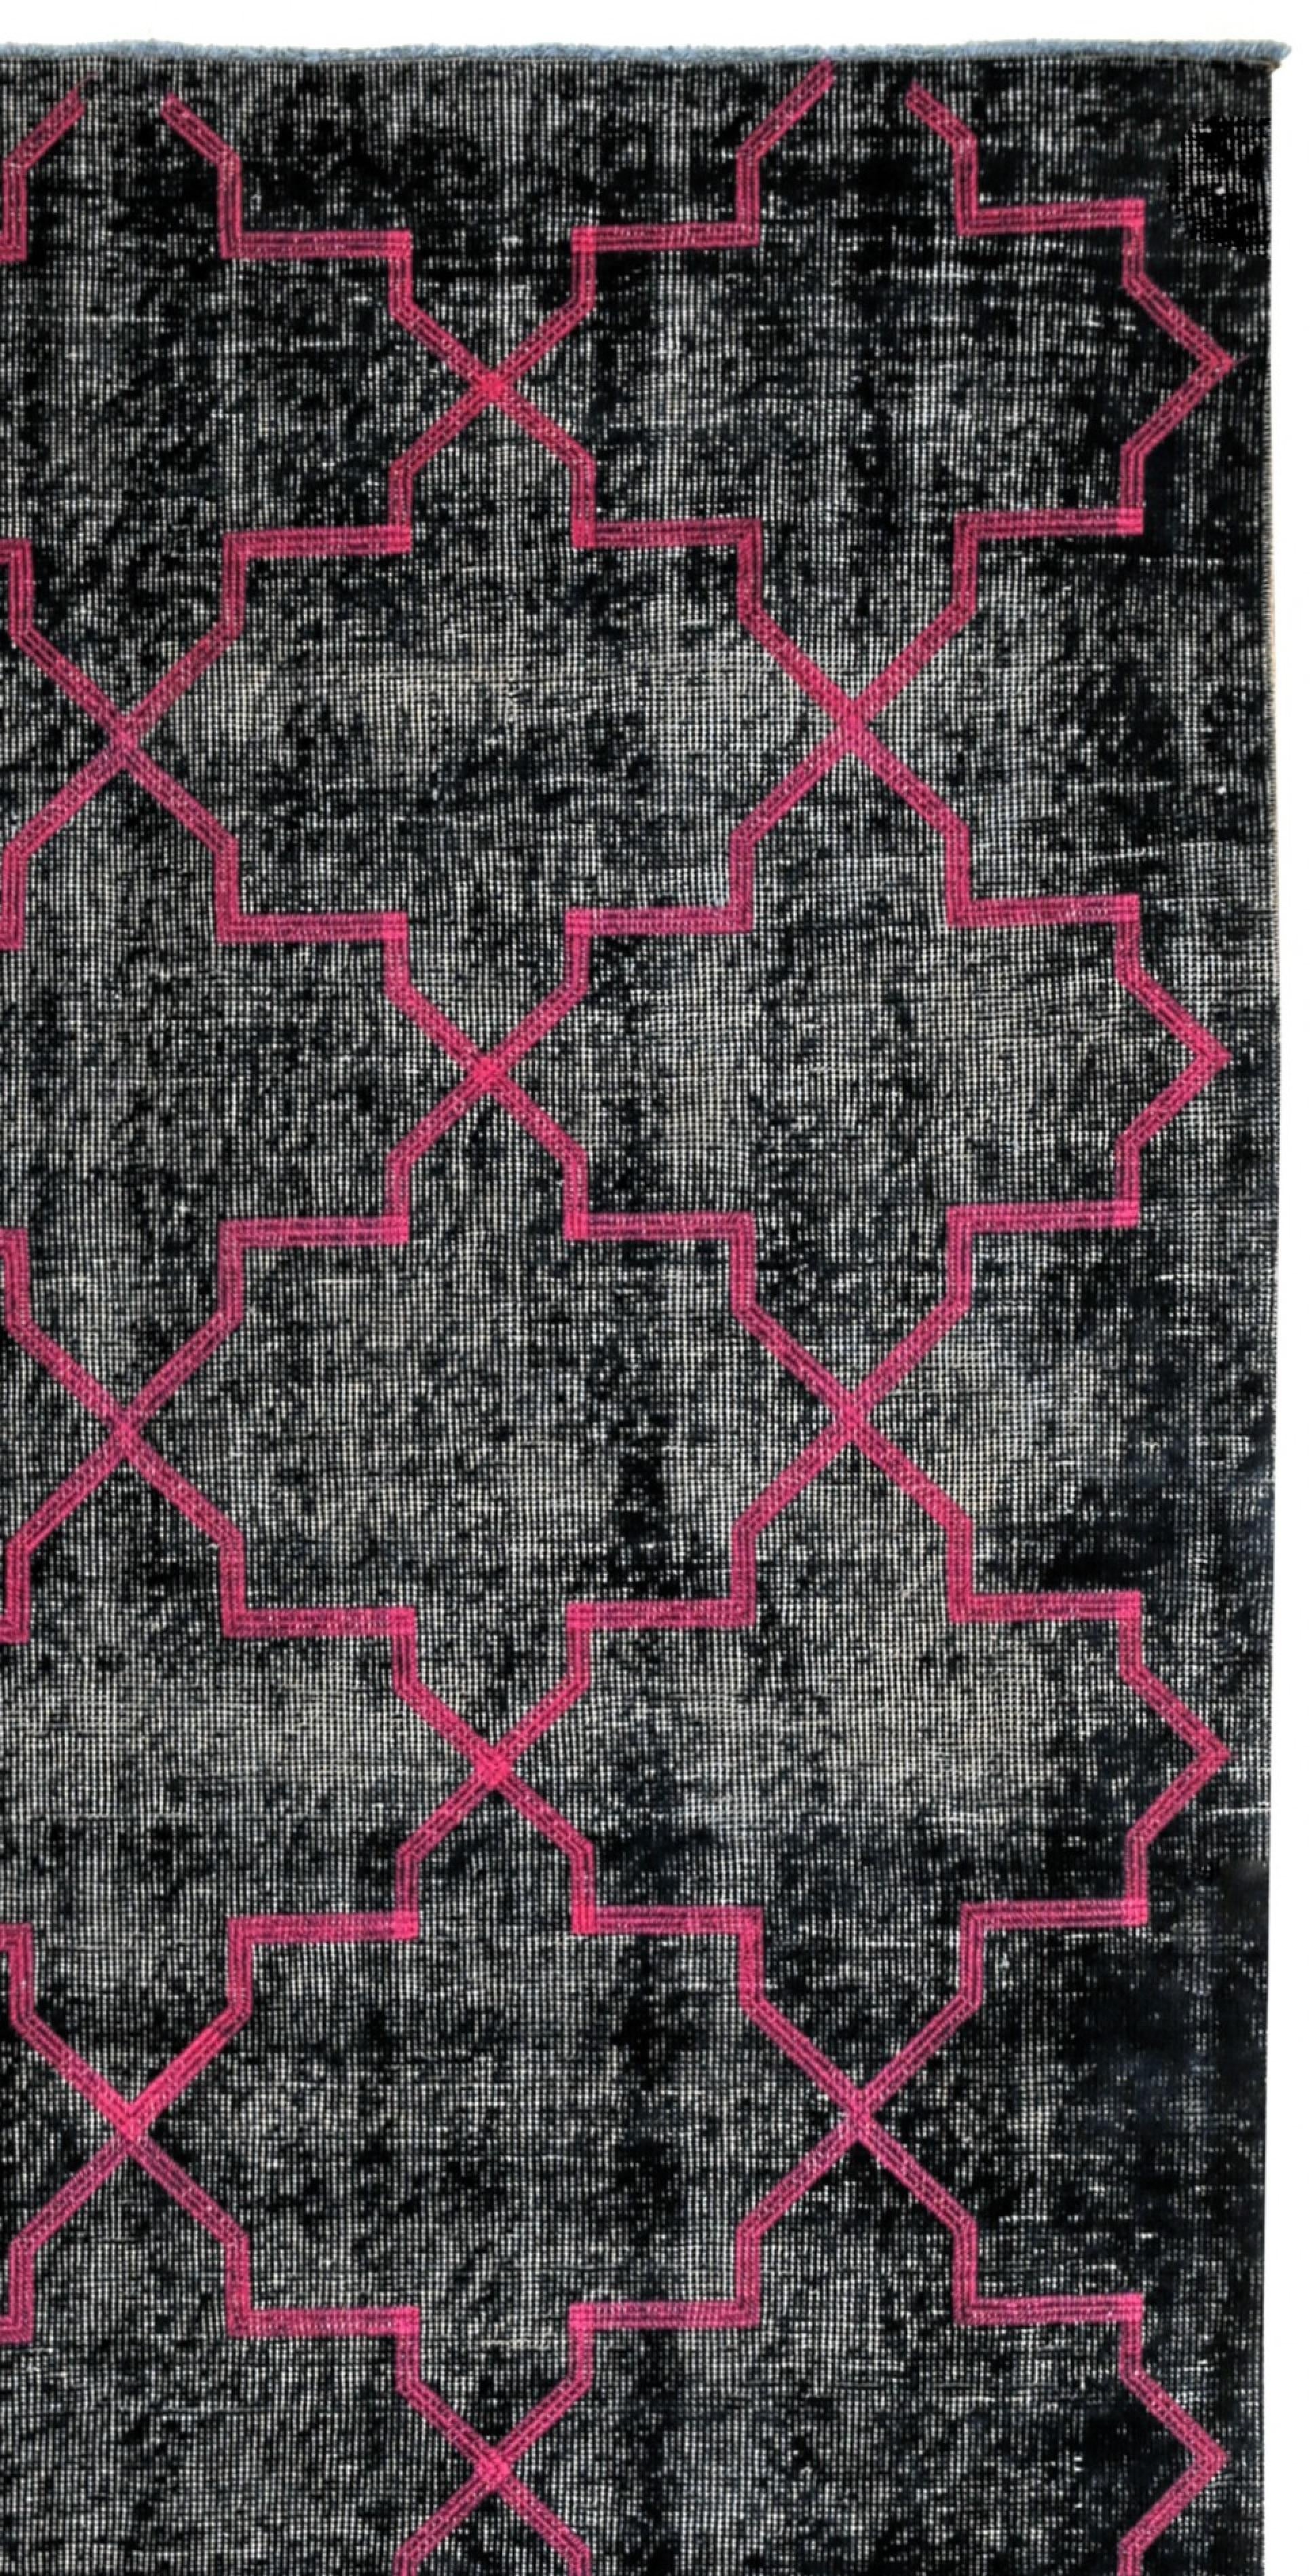 This is a fine example of an overdyed area rug. These rugs demonstrate a process best described as 'The modern palette applied to classics'. It consists of an added step to the finishing process in which the rug is antique washed, sheared, and